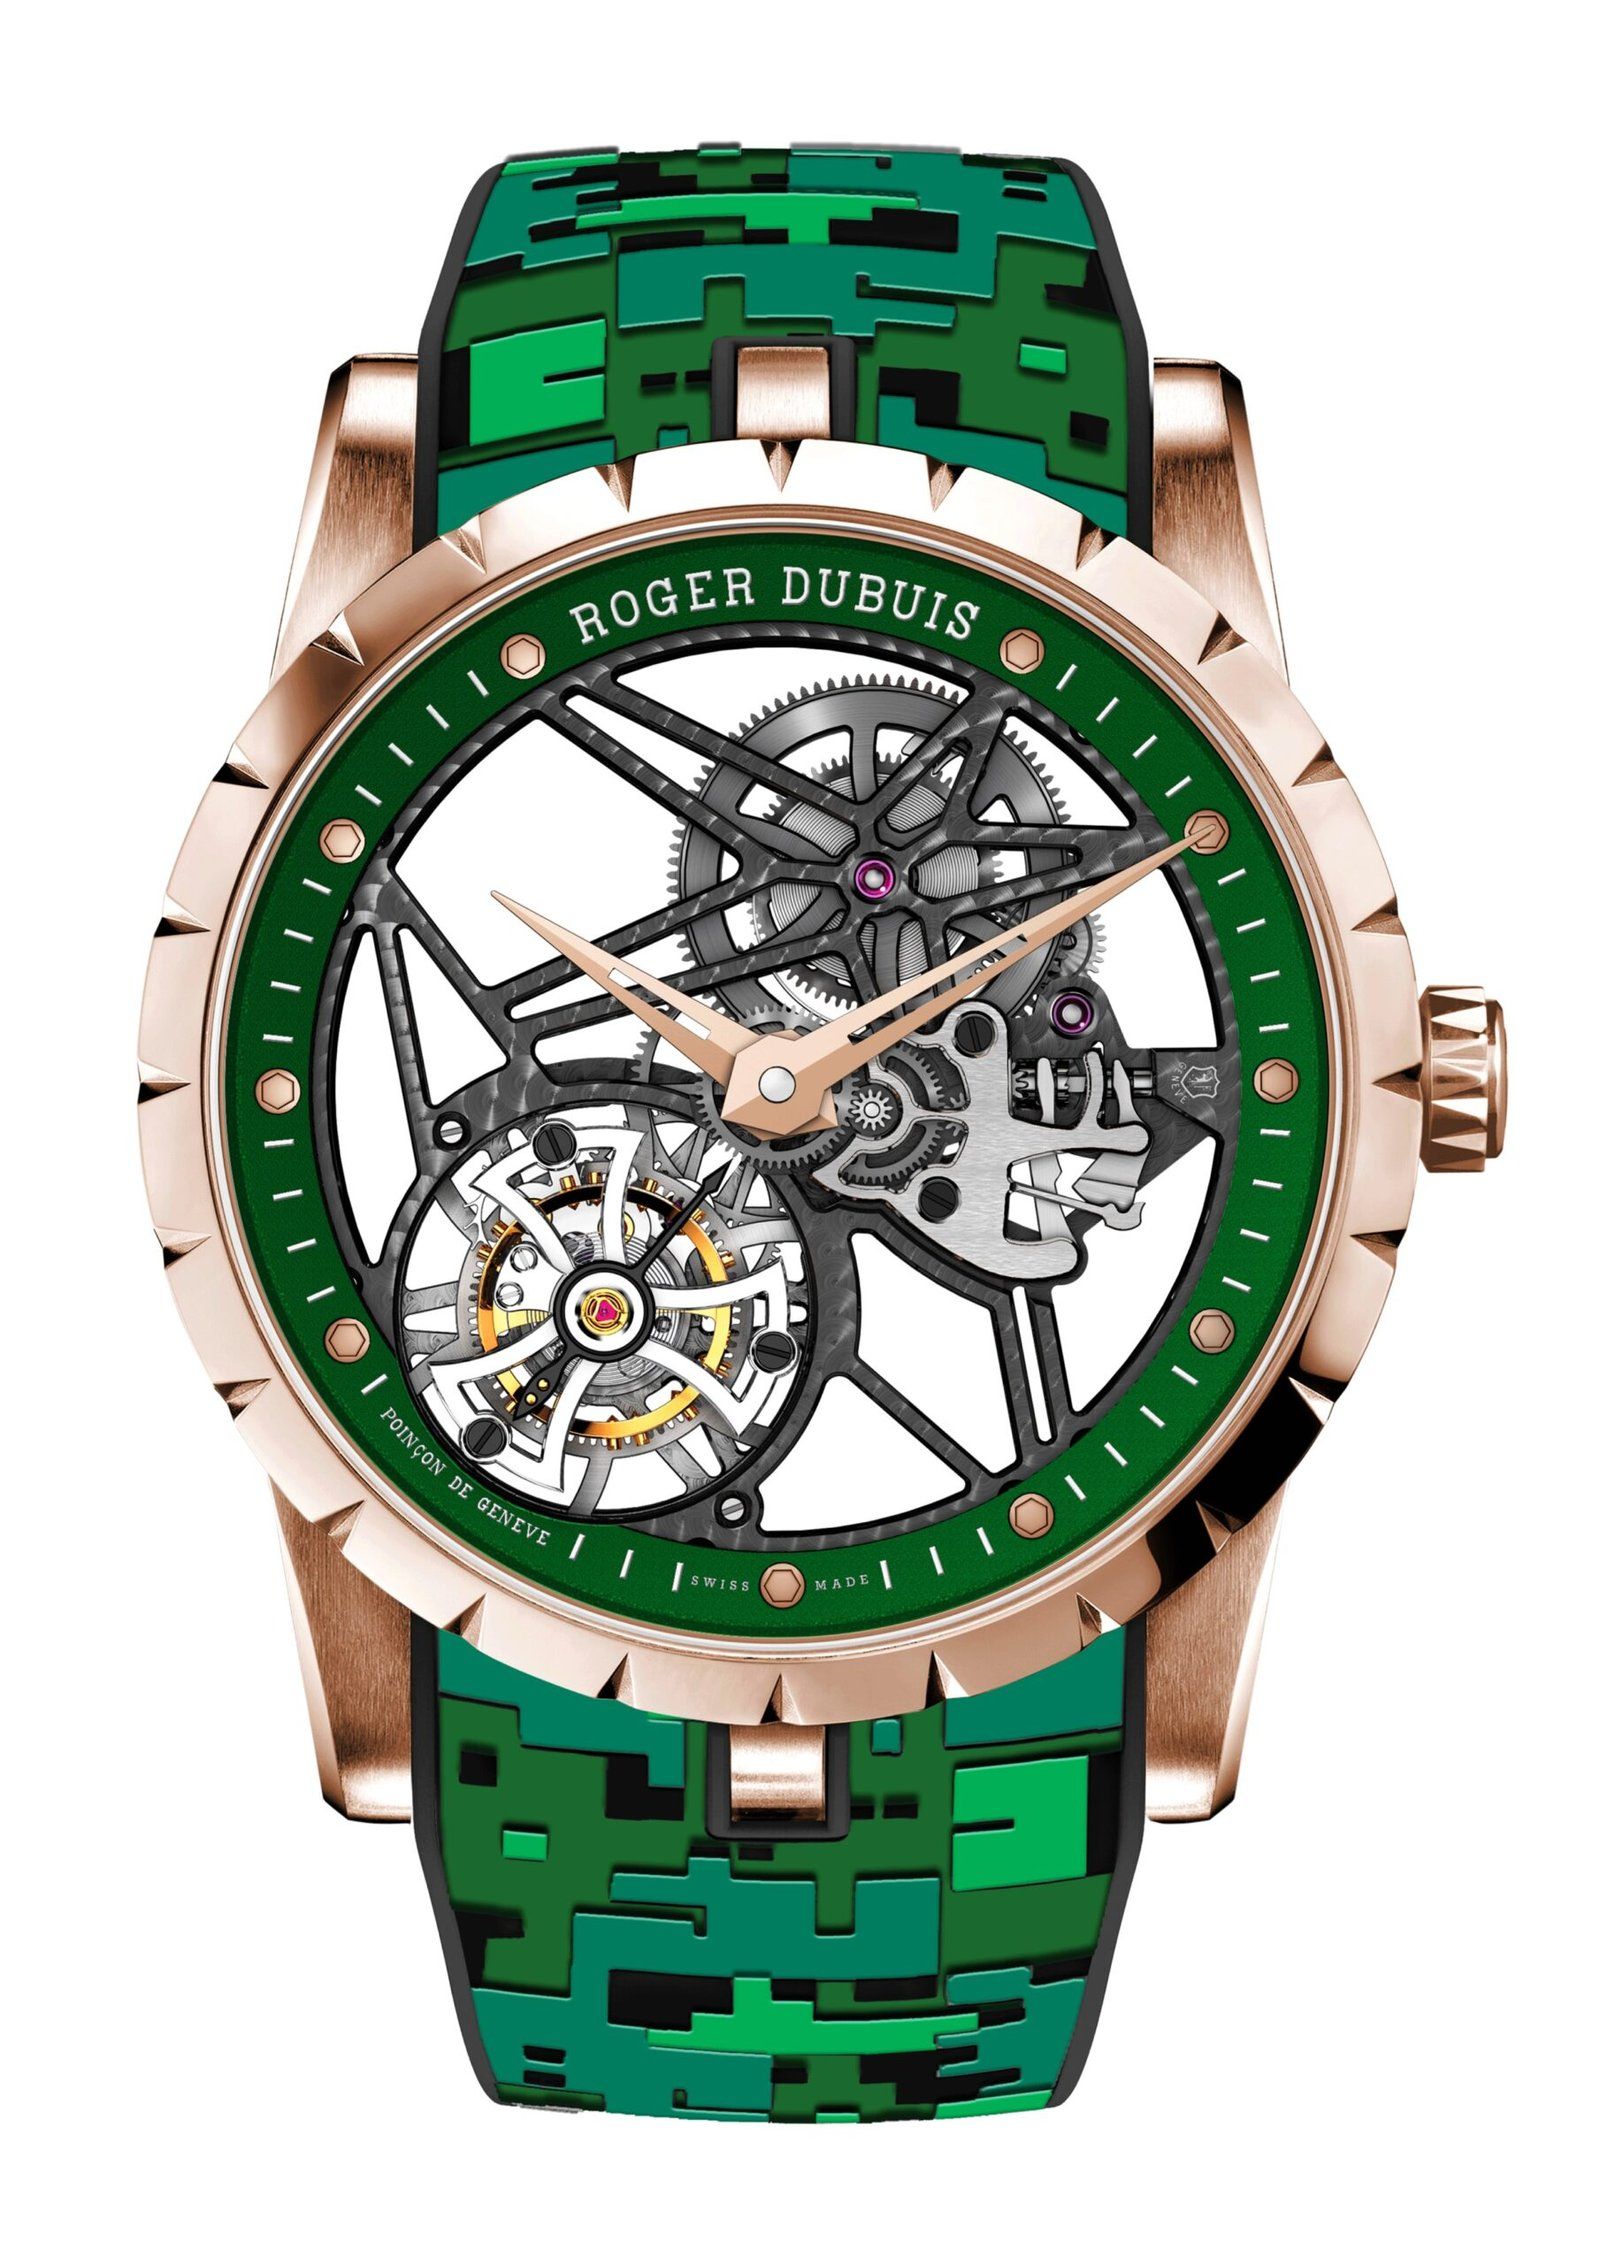 FEATURING: ROGER DUBUIS drops the Drop Collection